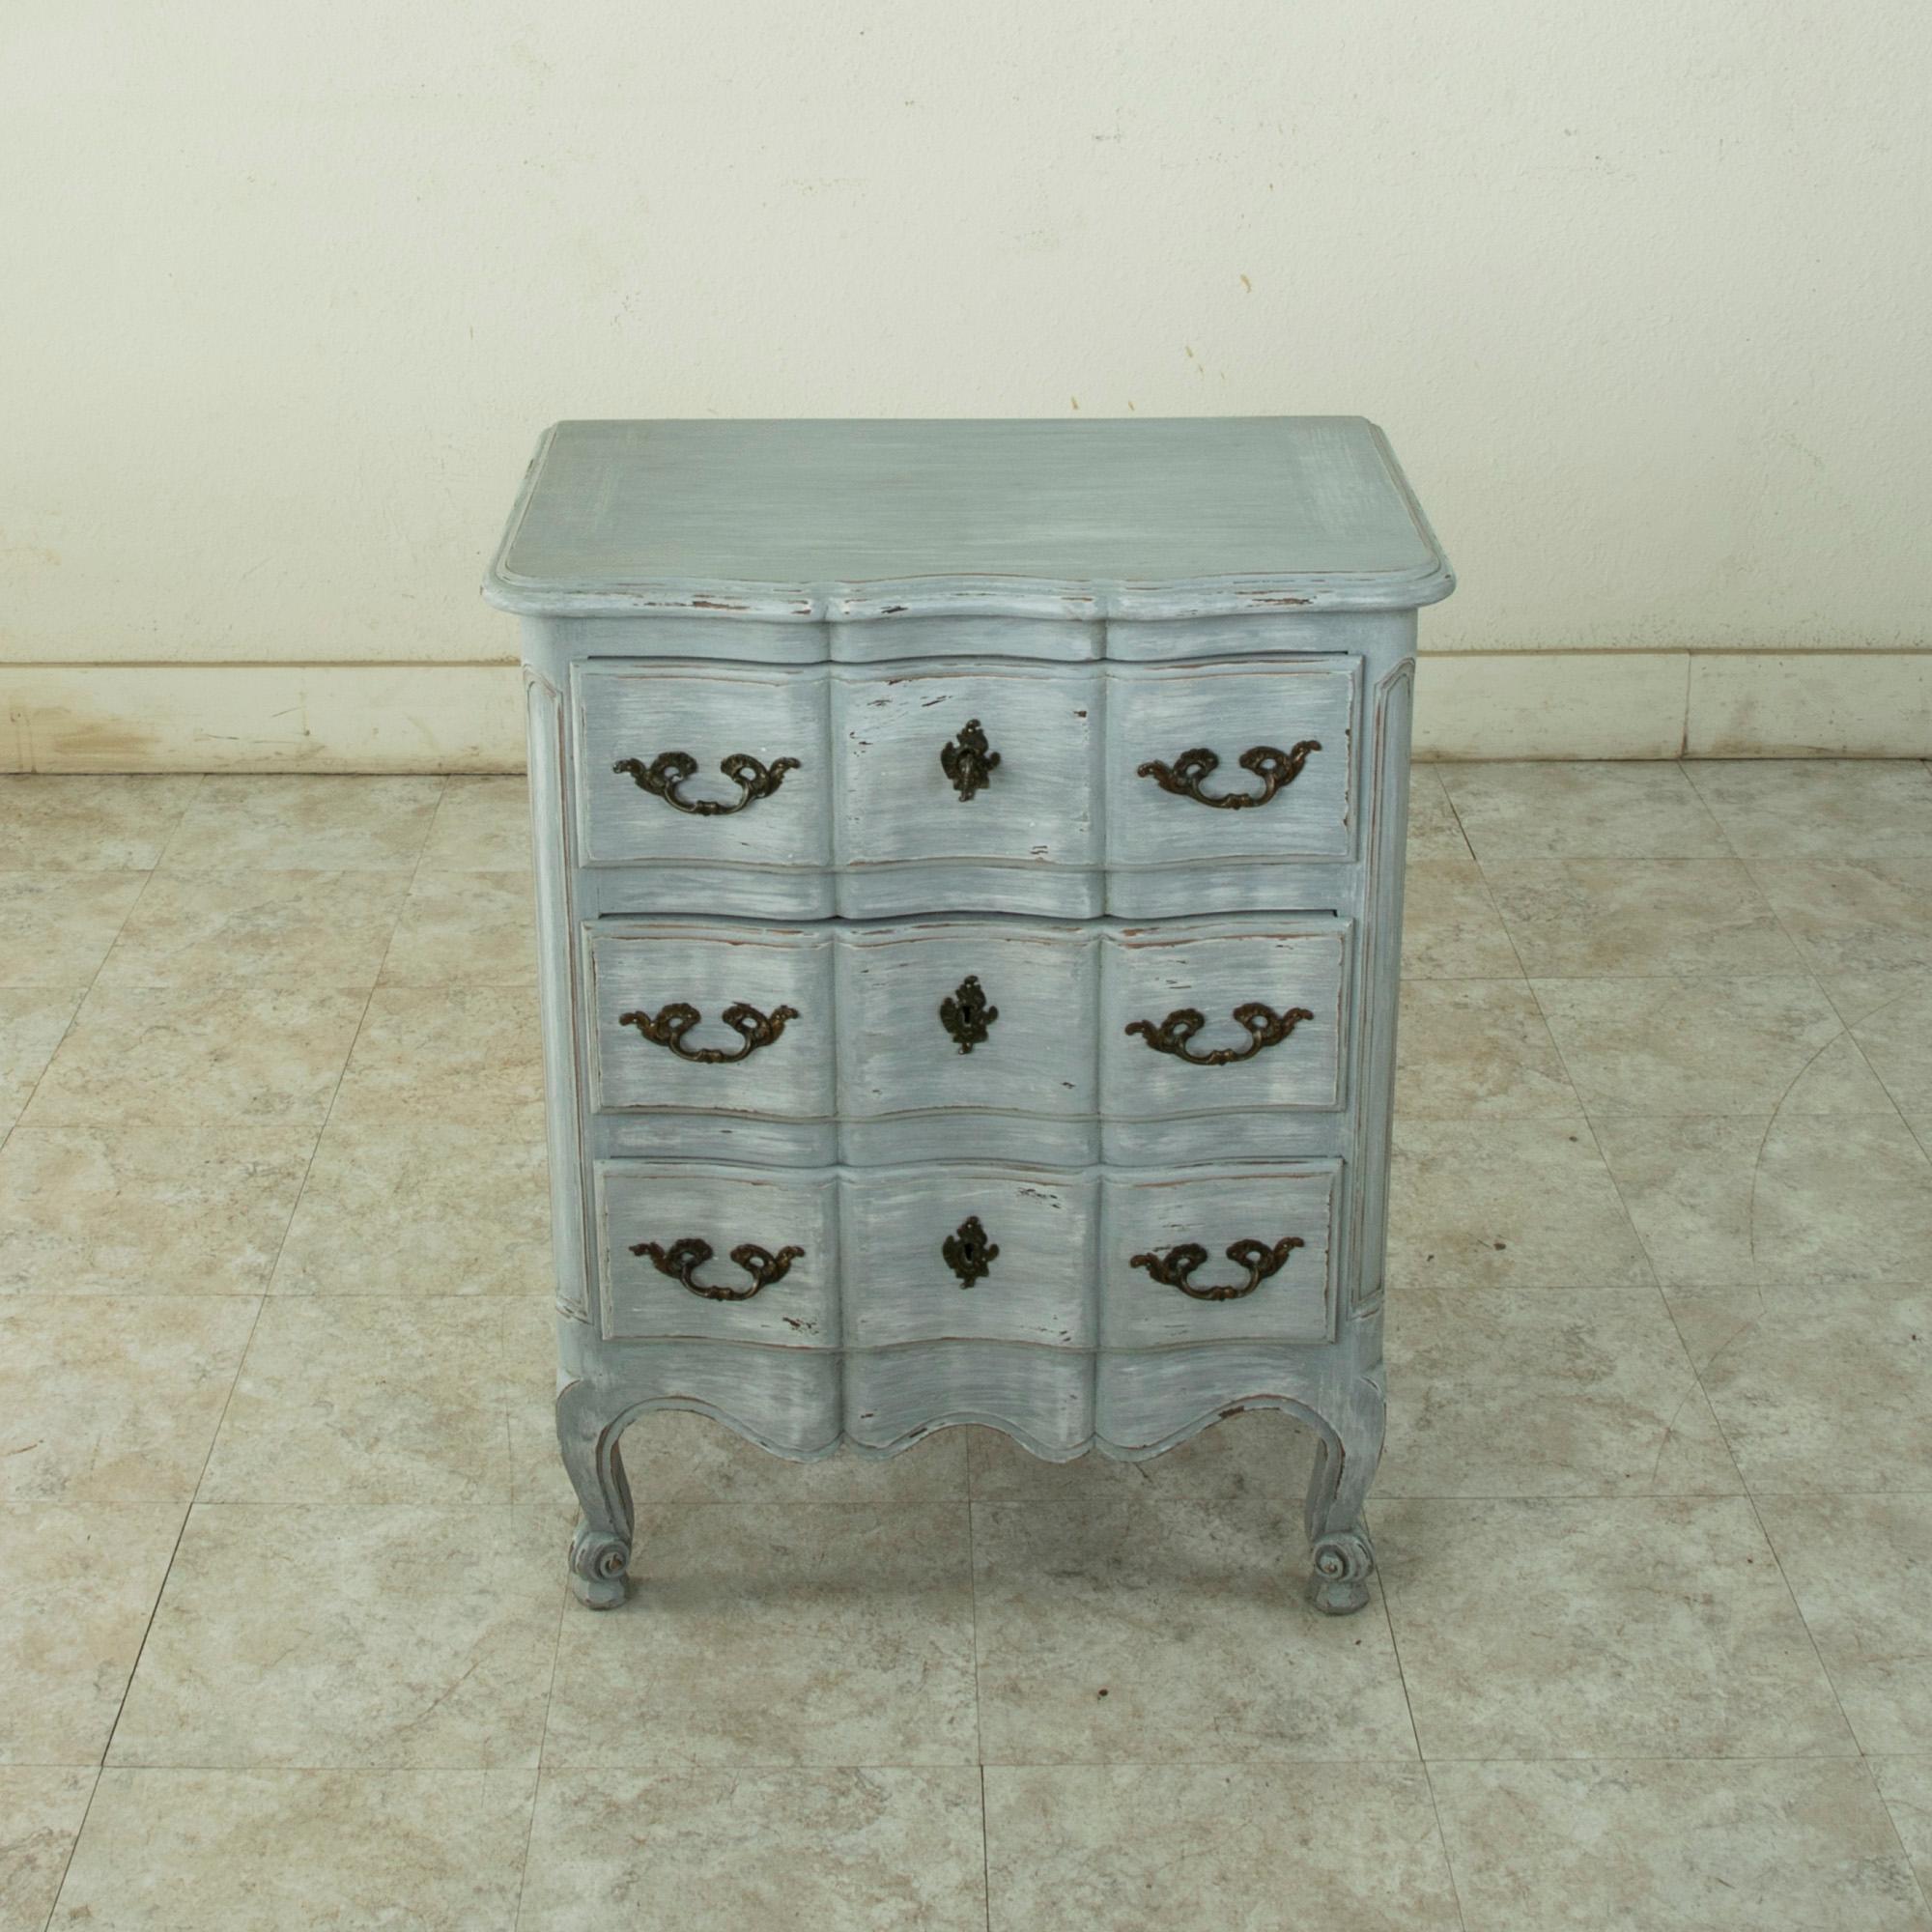 This small scale early twentieth century French Louis XV style beech wood commode or chest is painted in a worn pale blue-grey known as Marie Antoinette grey. Three drawers of dovetail construction feature curved fronts appointed with bronze drawer